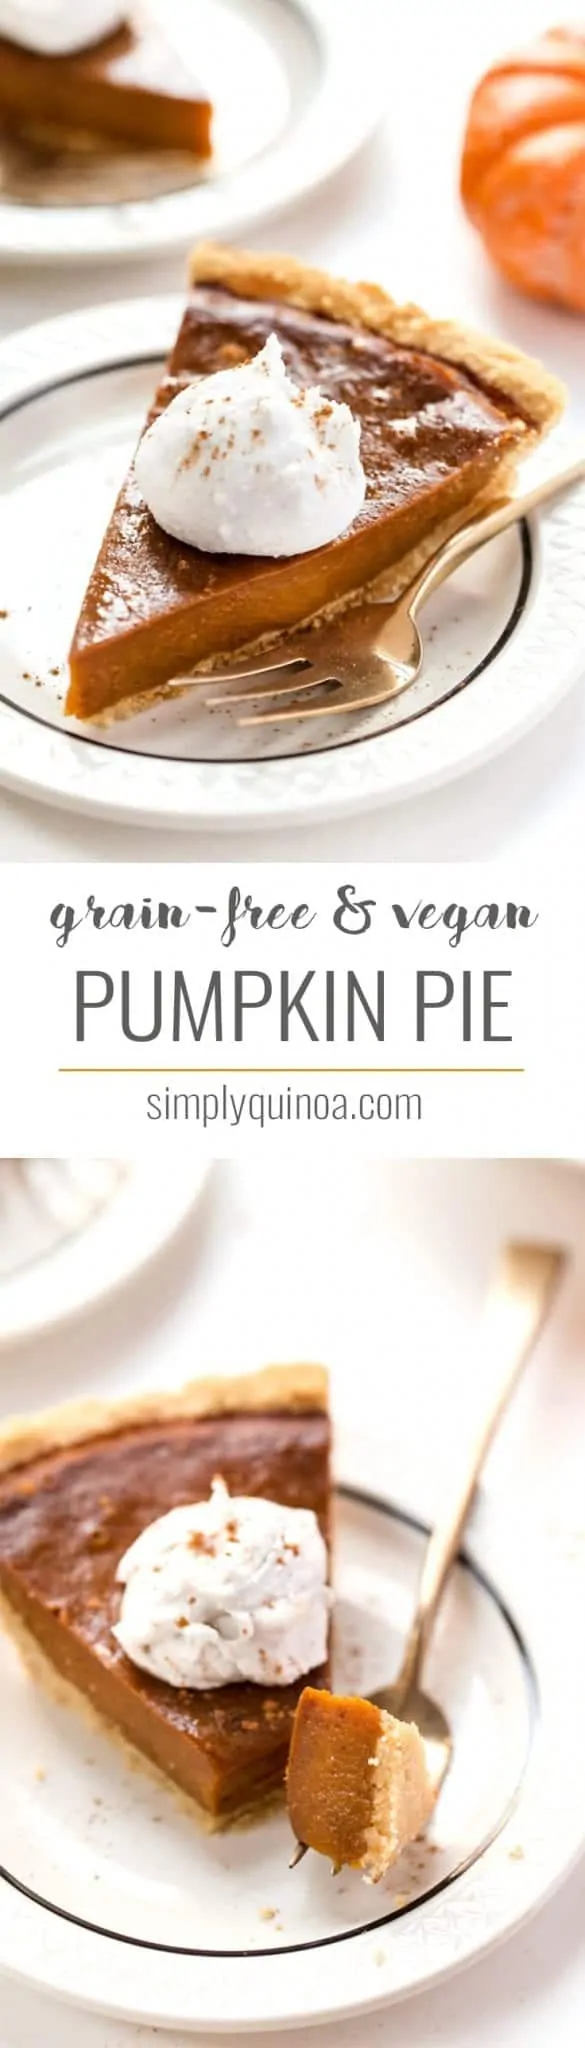 Grain-Free & Vegan Pumpkin Pie ???? made entirely in the food processor, with an almond flour pie crust and topped with coconut whip!